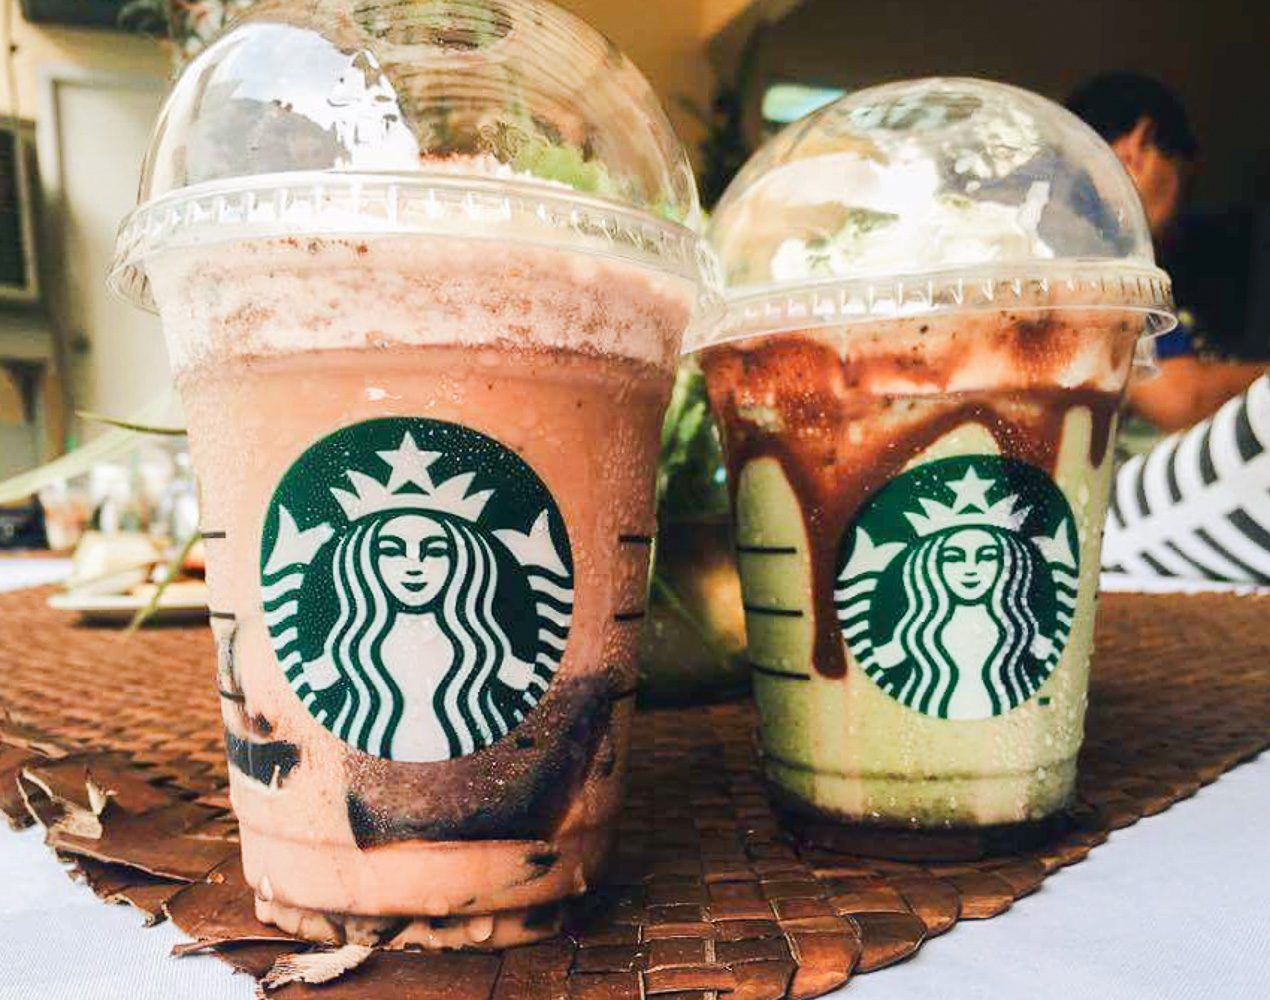 Check it out: Starbucks PH unveils 2 new frappuccinos